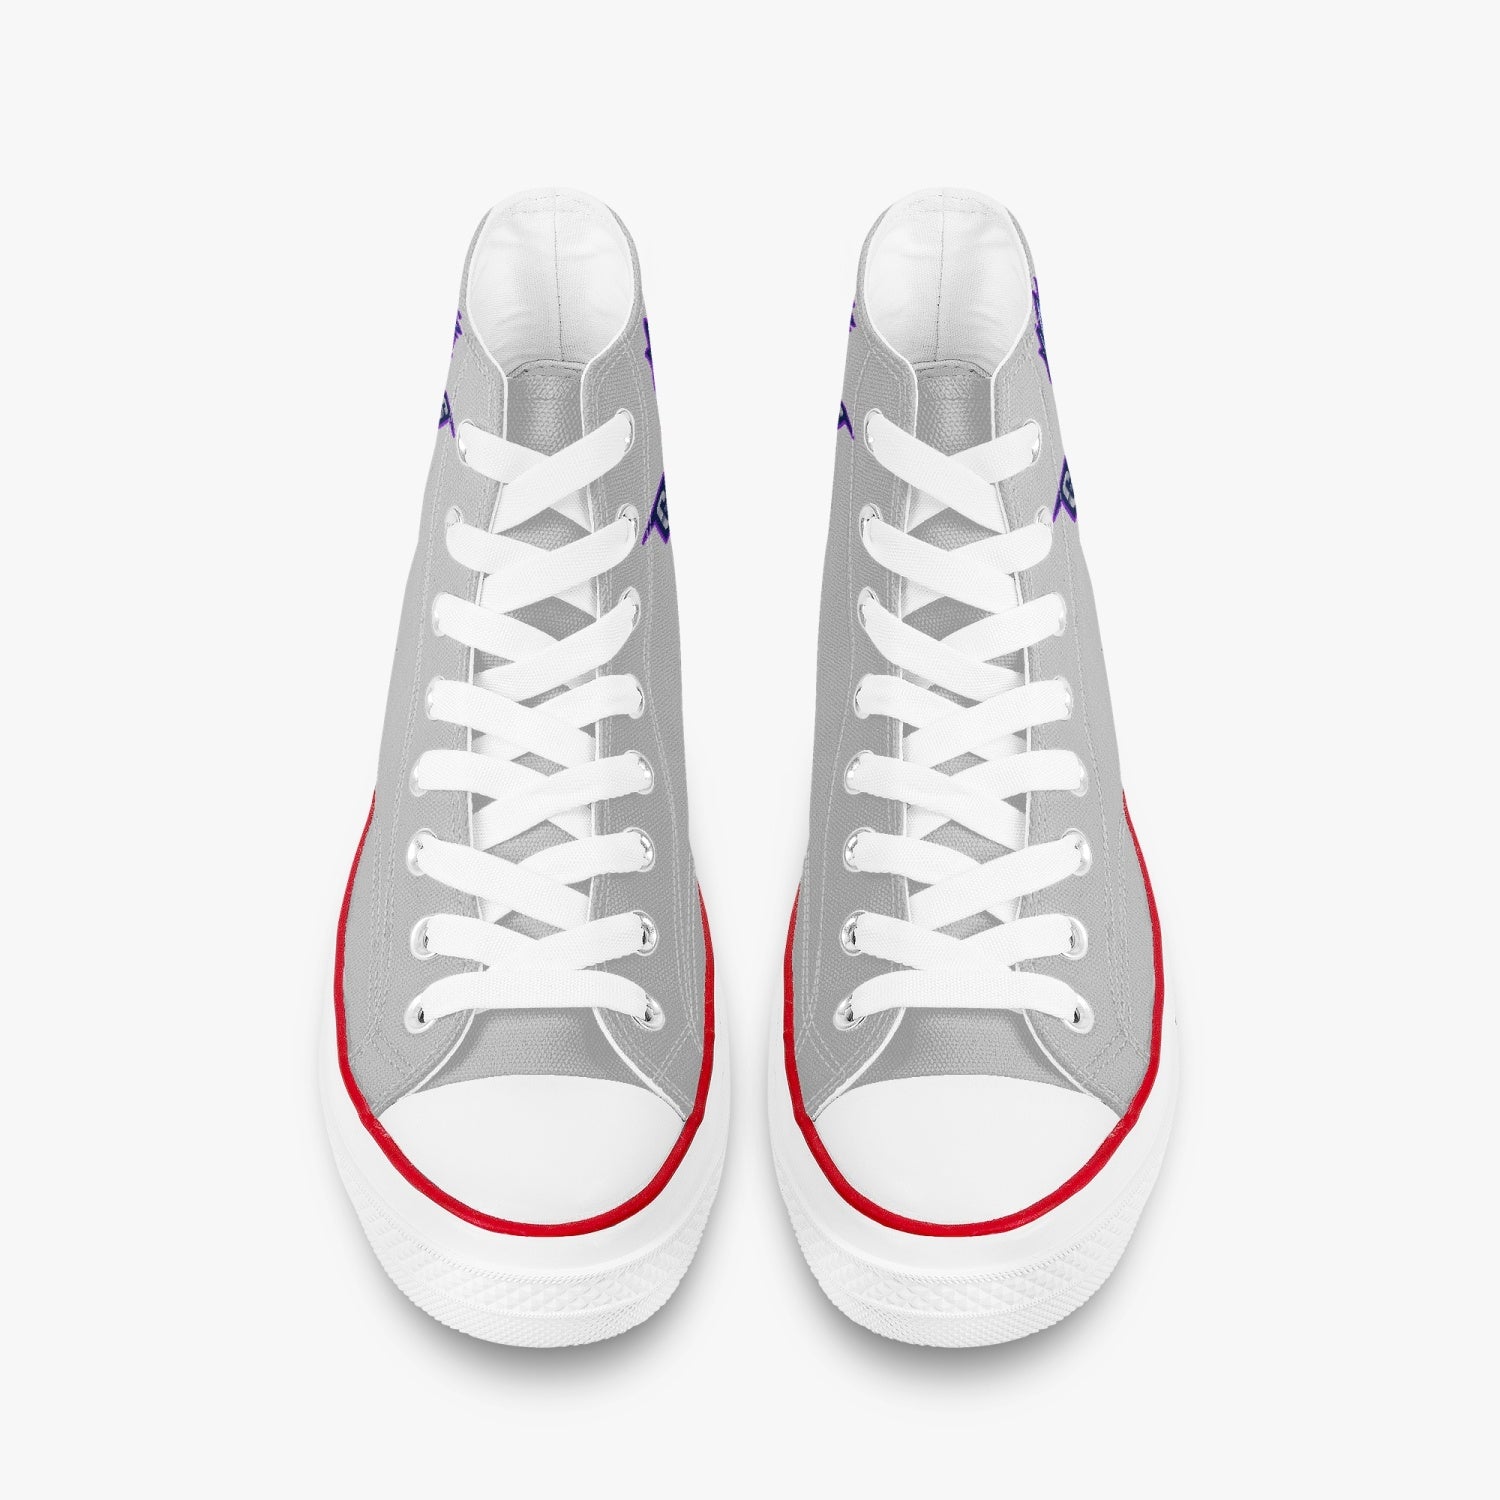 nm High-Top Canvas Shoes - White